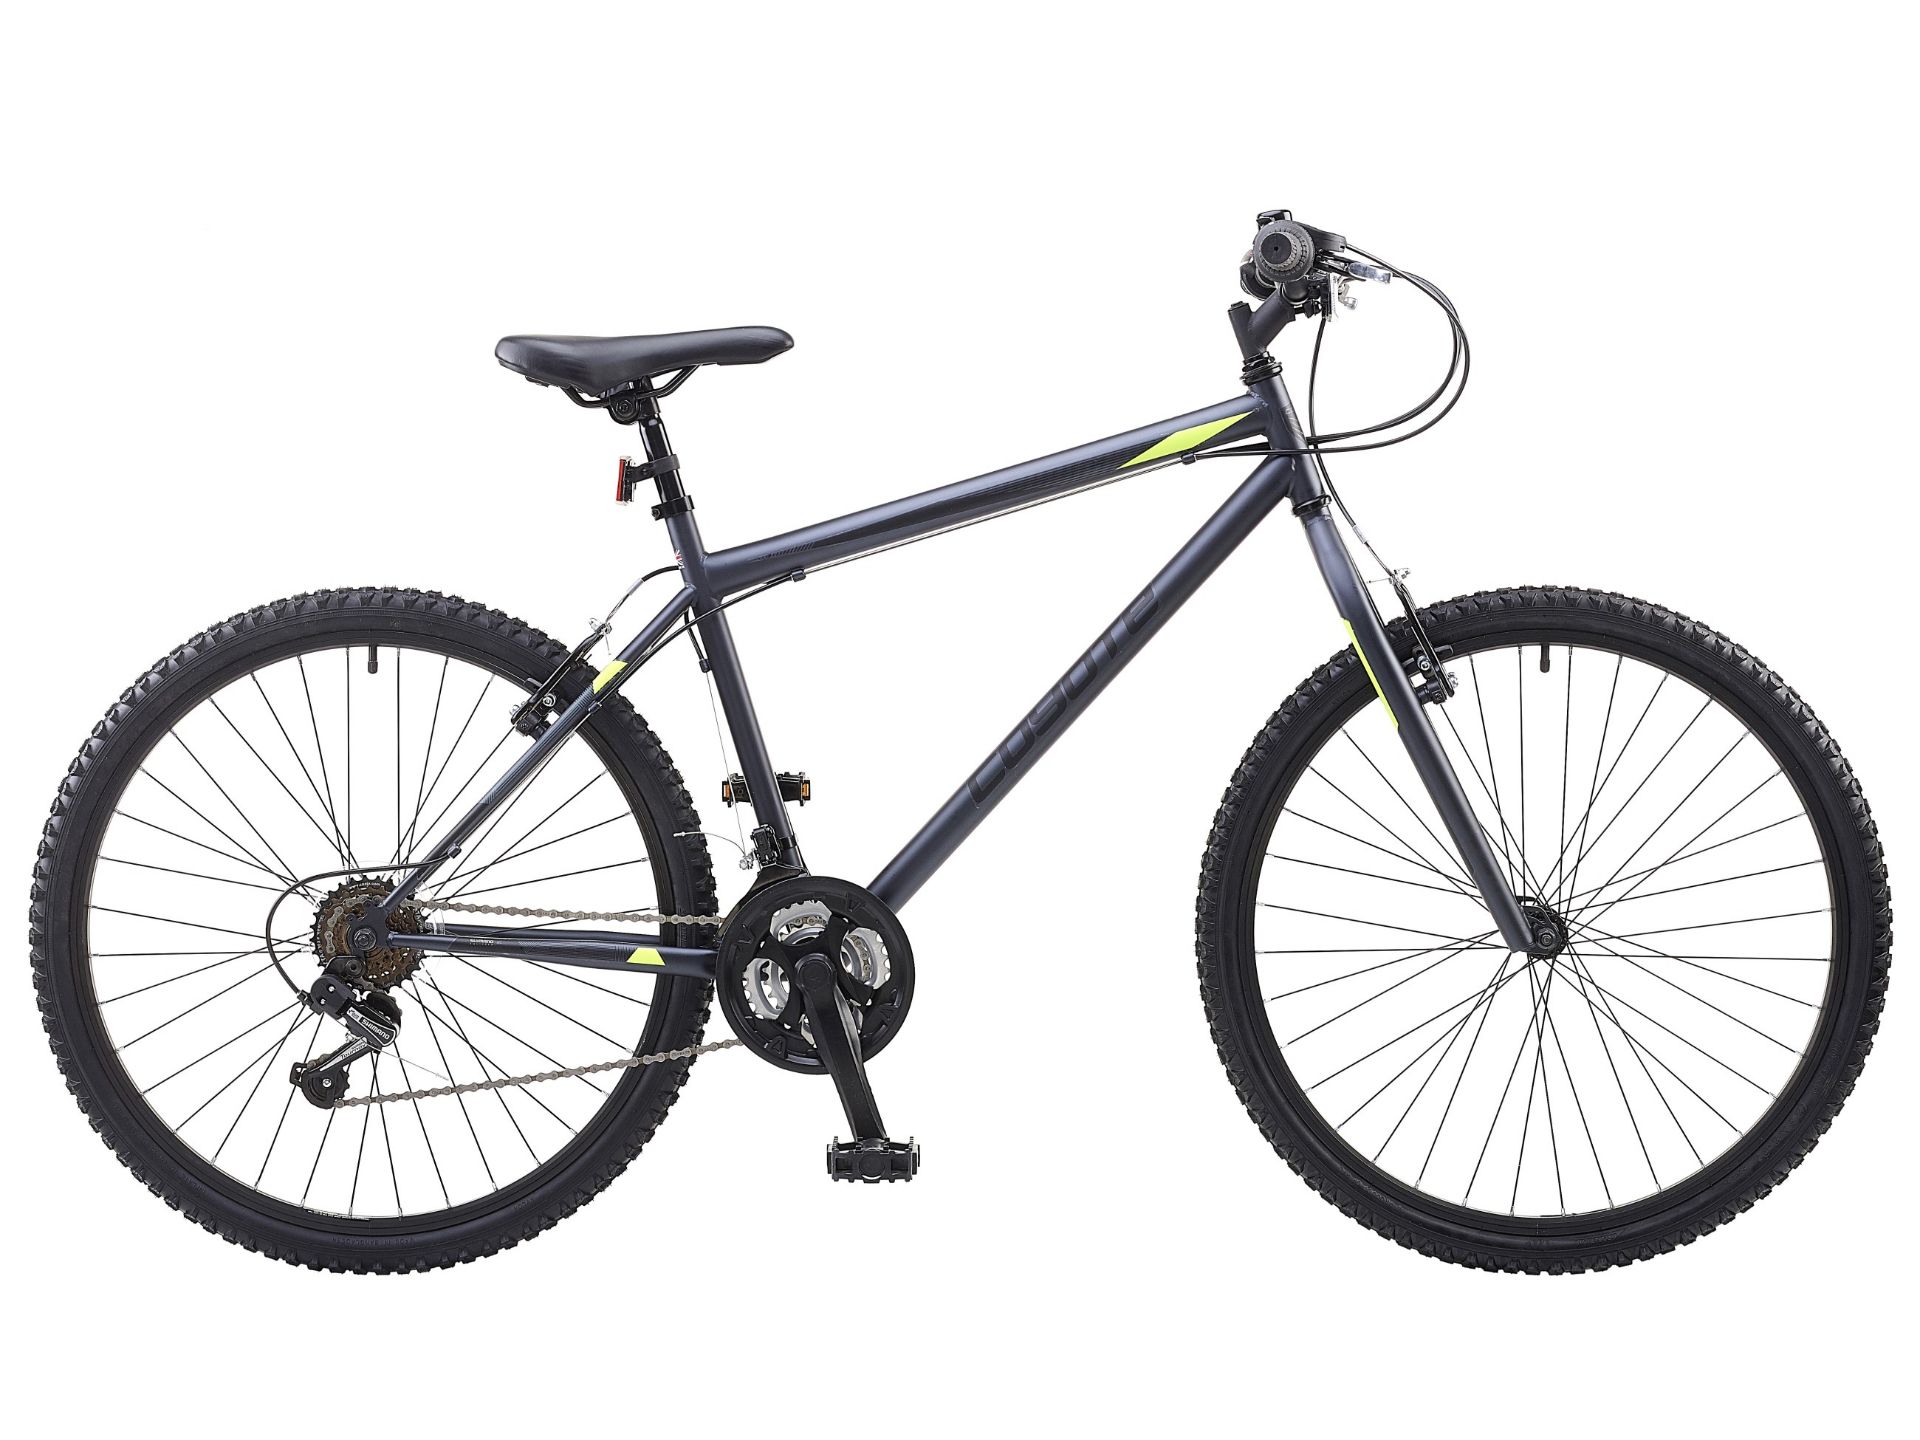 Coyote Element XR Gents Mountain Bike. RRP £279.00. The Element XR is built around a high tensile